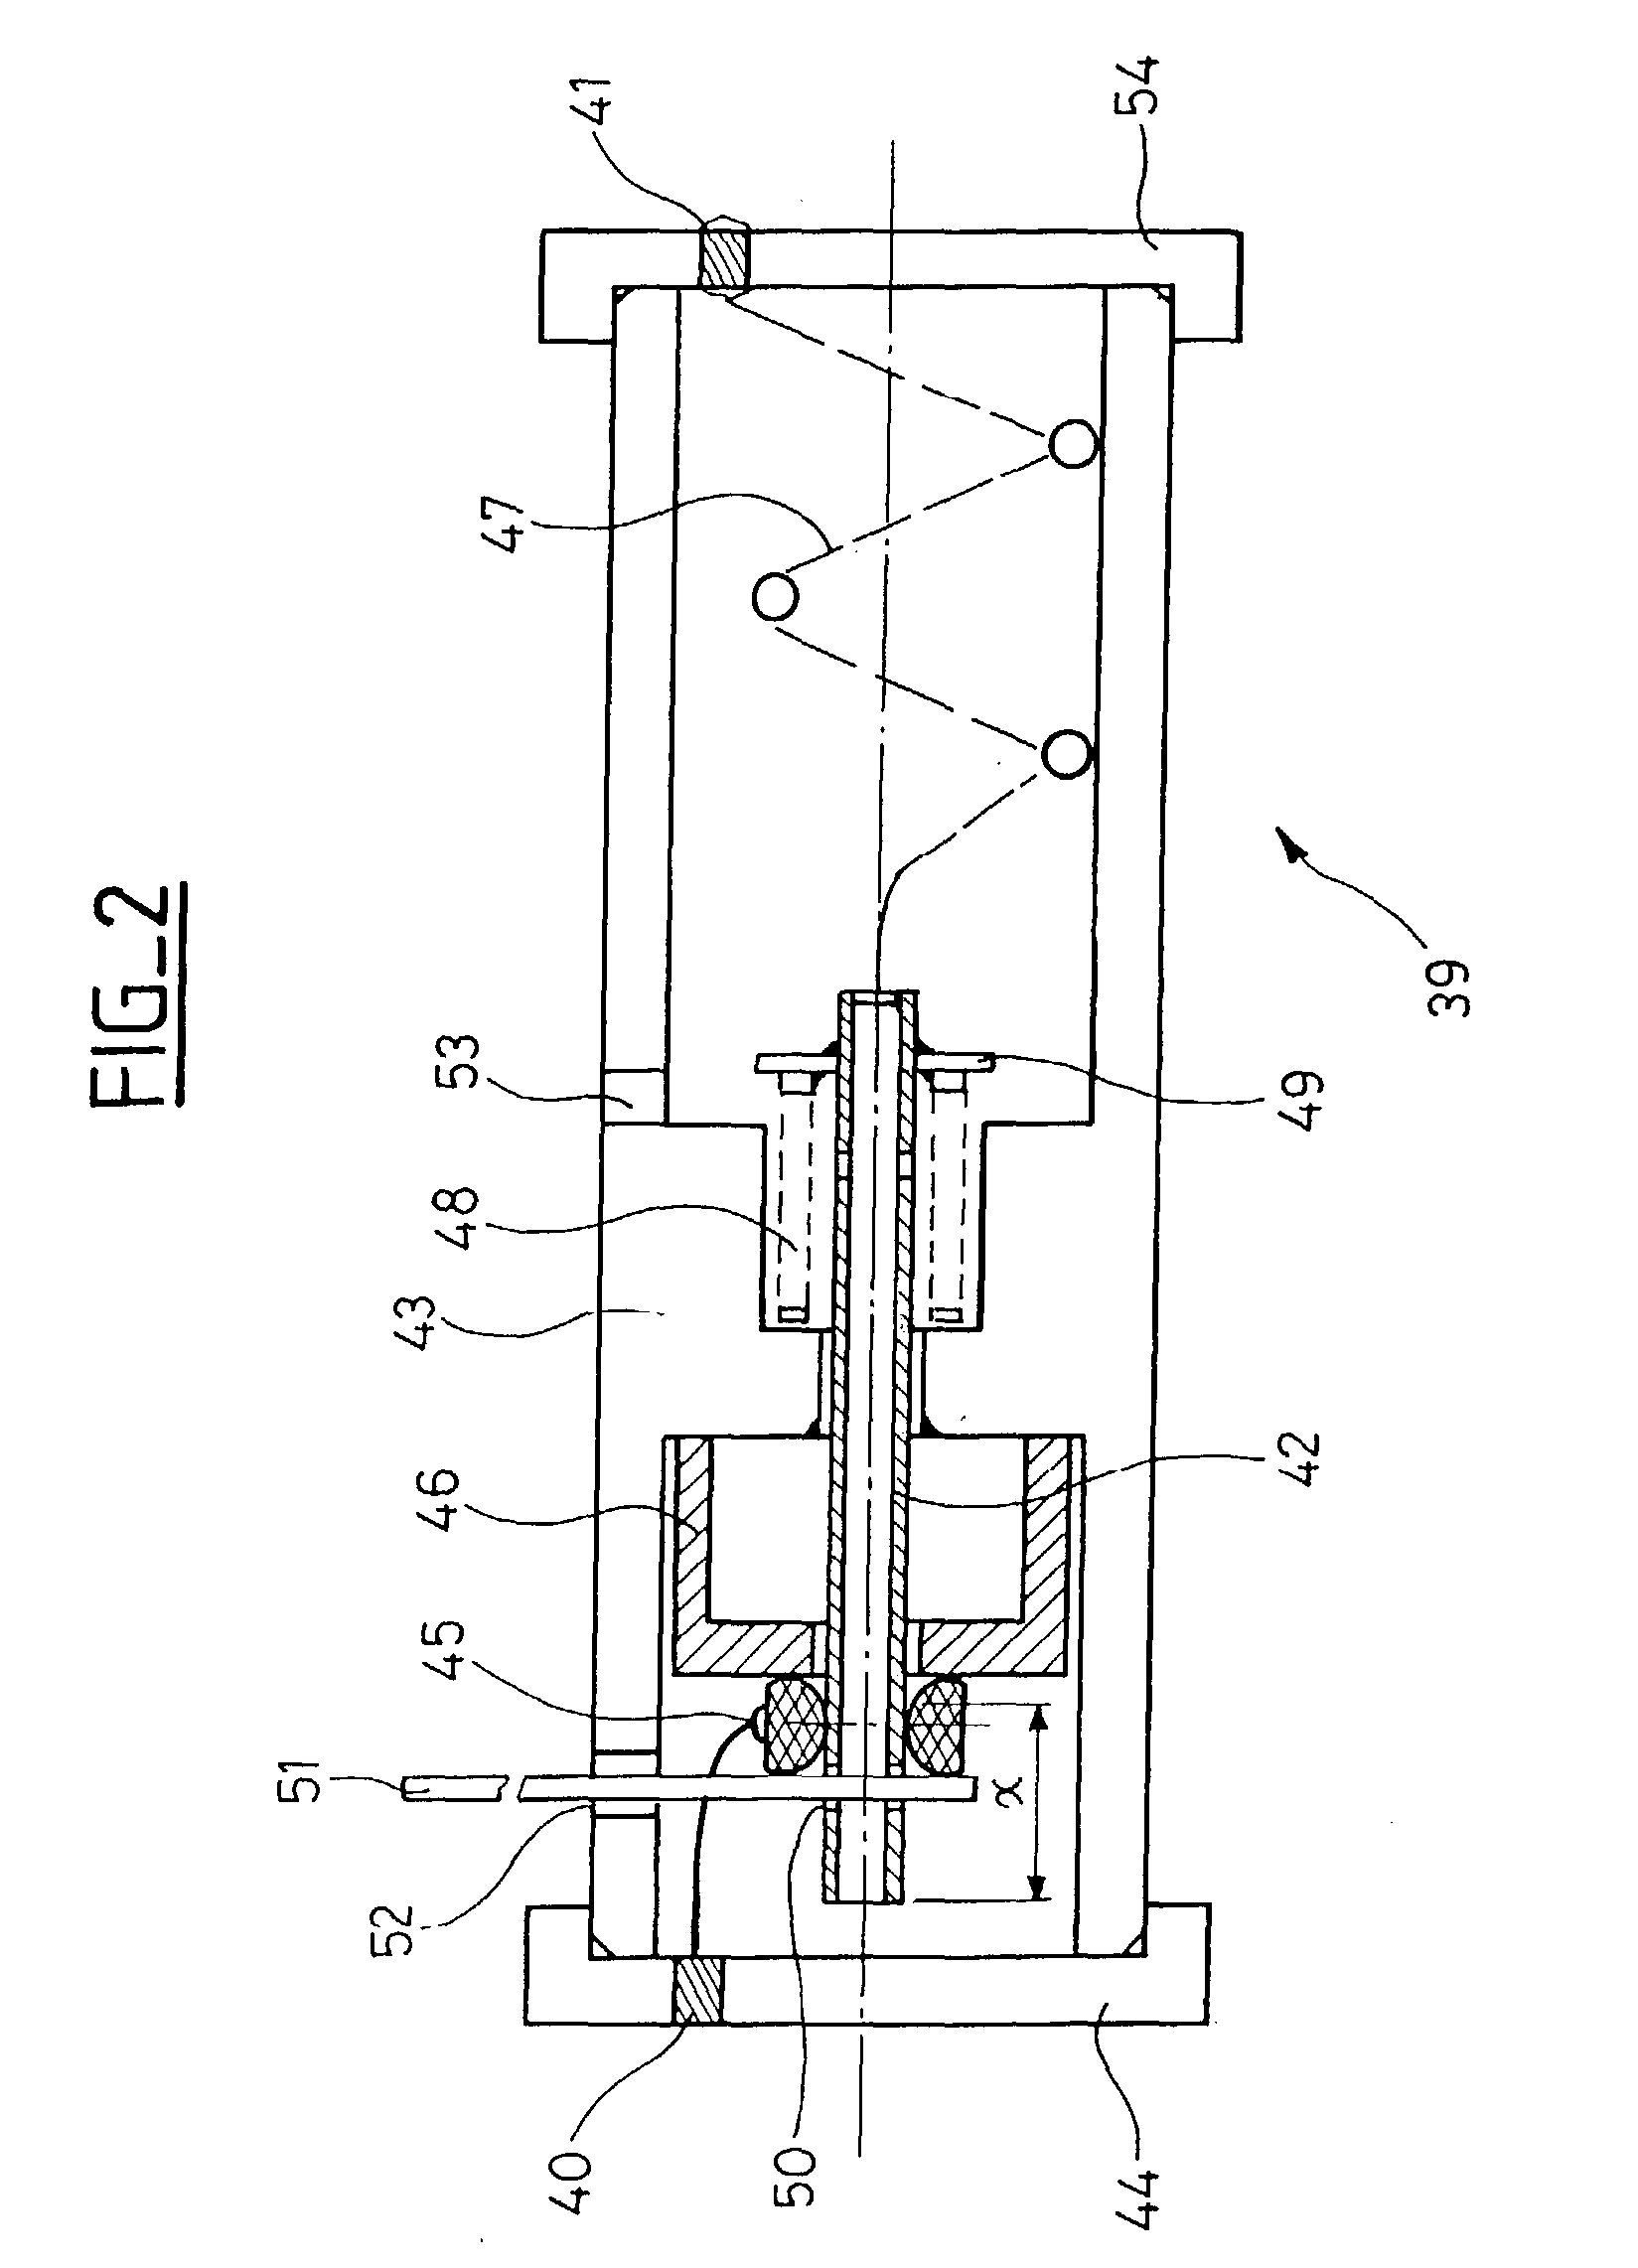 Protection system for protecting a poly-phase distribution transformer insulated in a liquid dielectric, the system including at least one phase disconnector switch